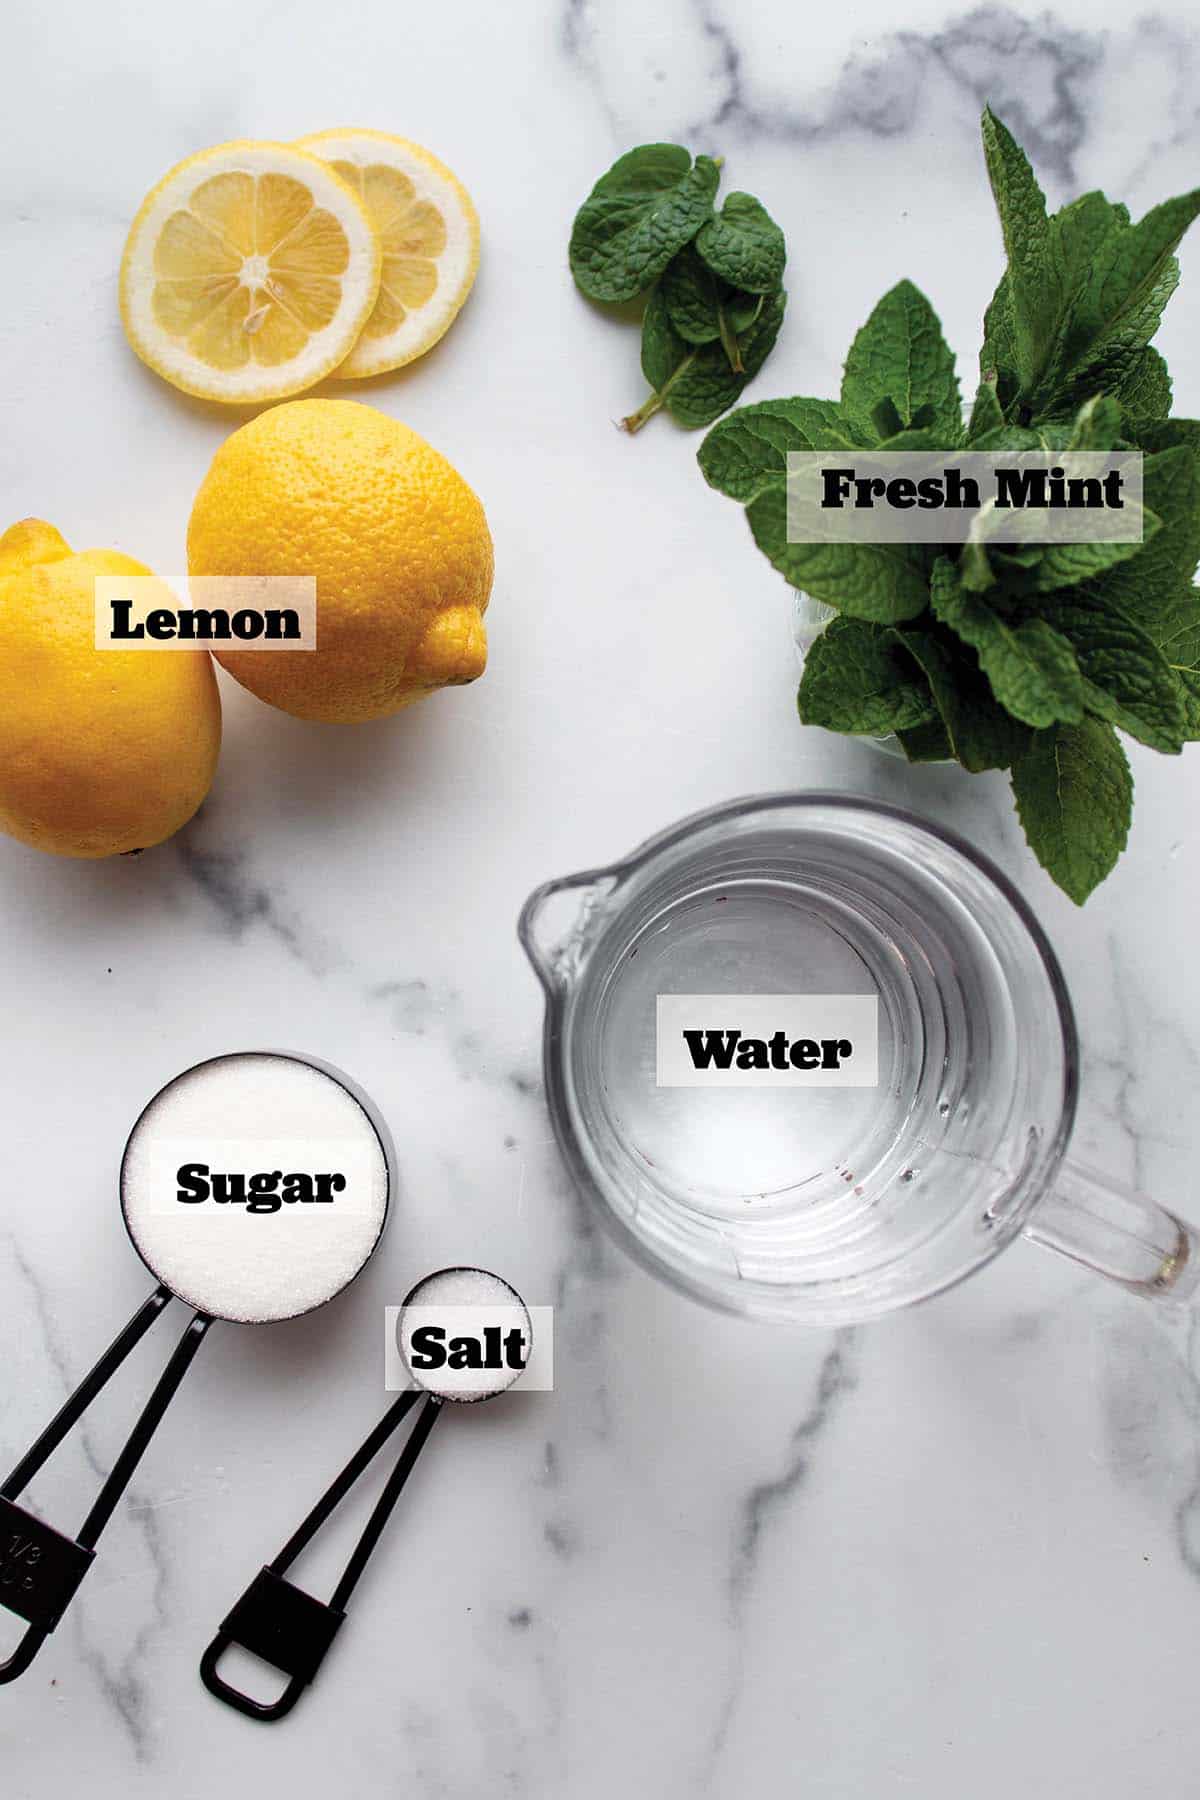 Fresh lemon, mint, a cup of water and measuring spoons with sugar and salt.